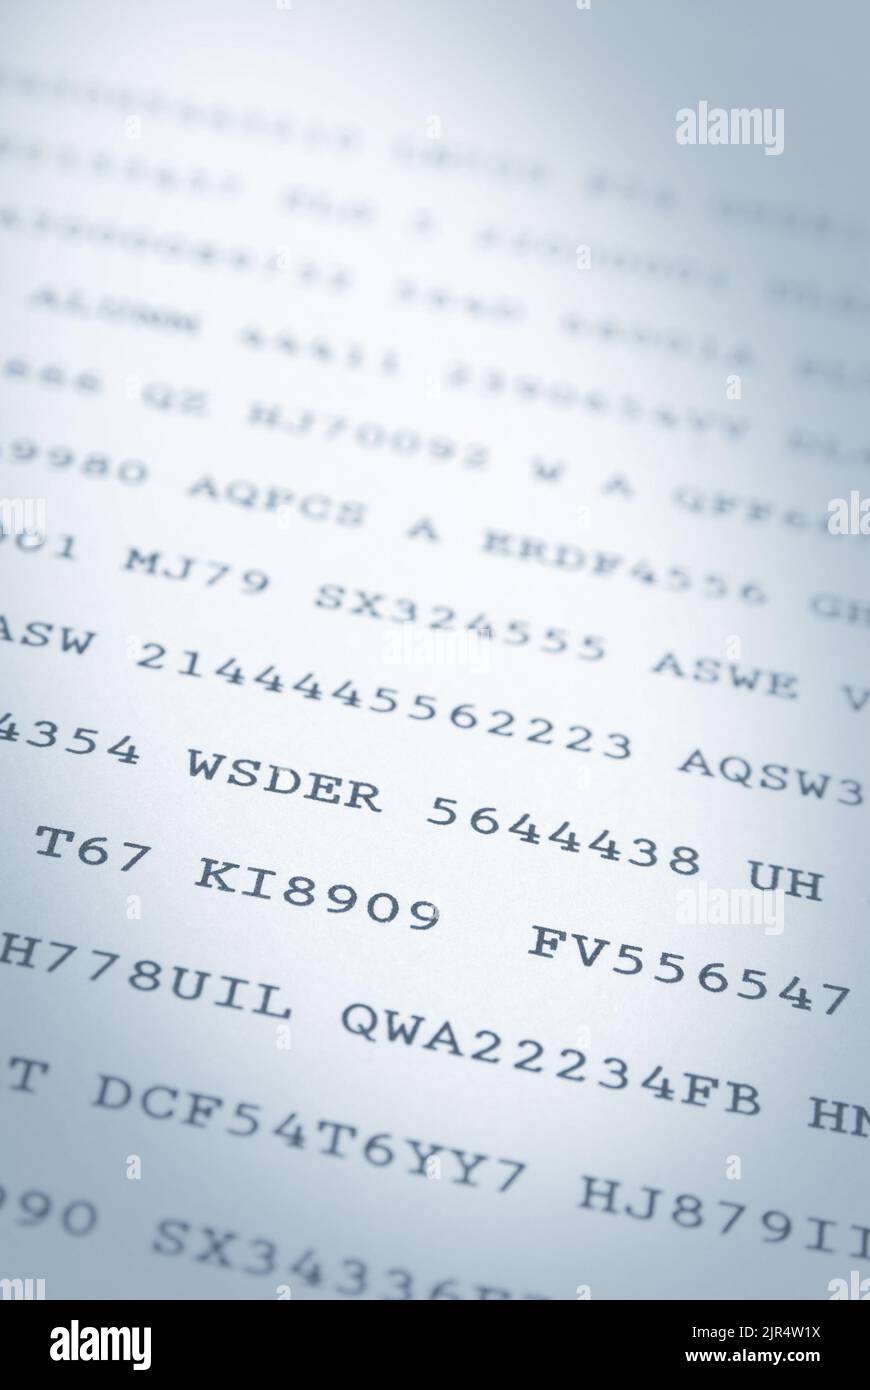 Close up of random codes of numbers and letters printed on paper Stock Photo